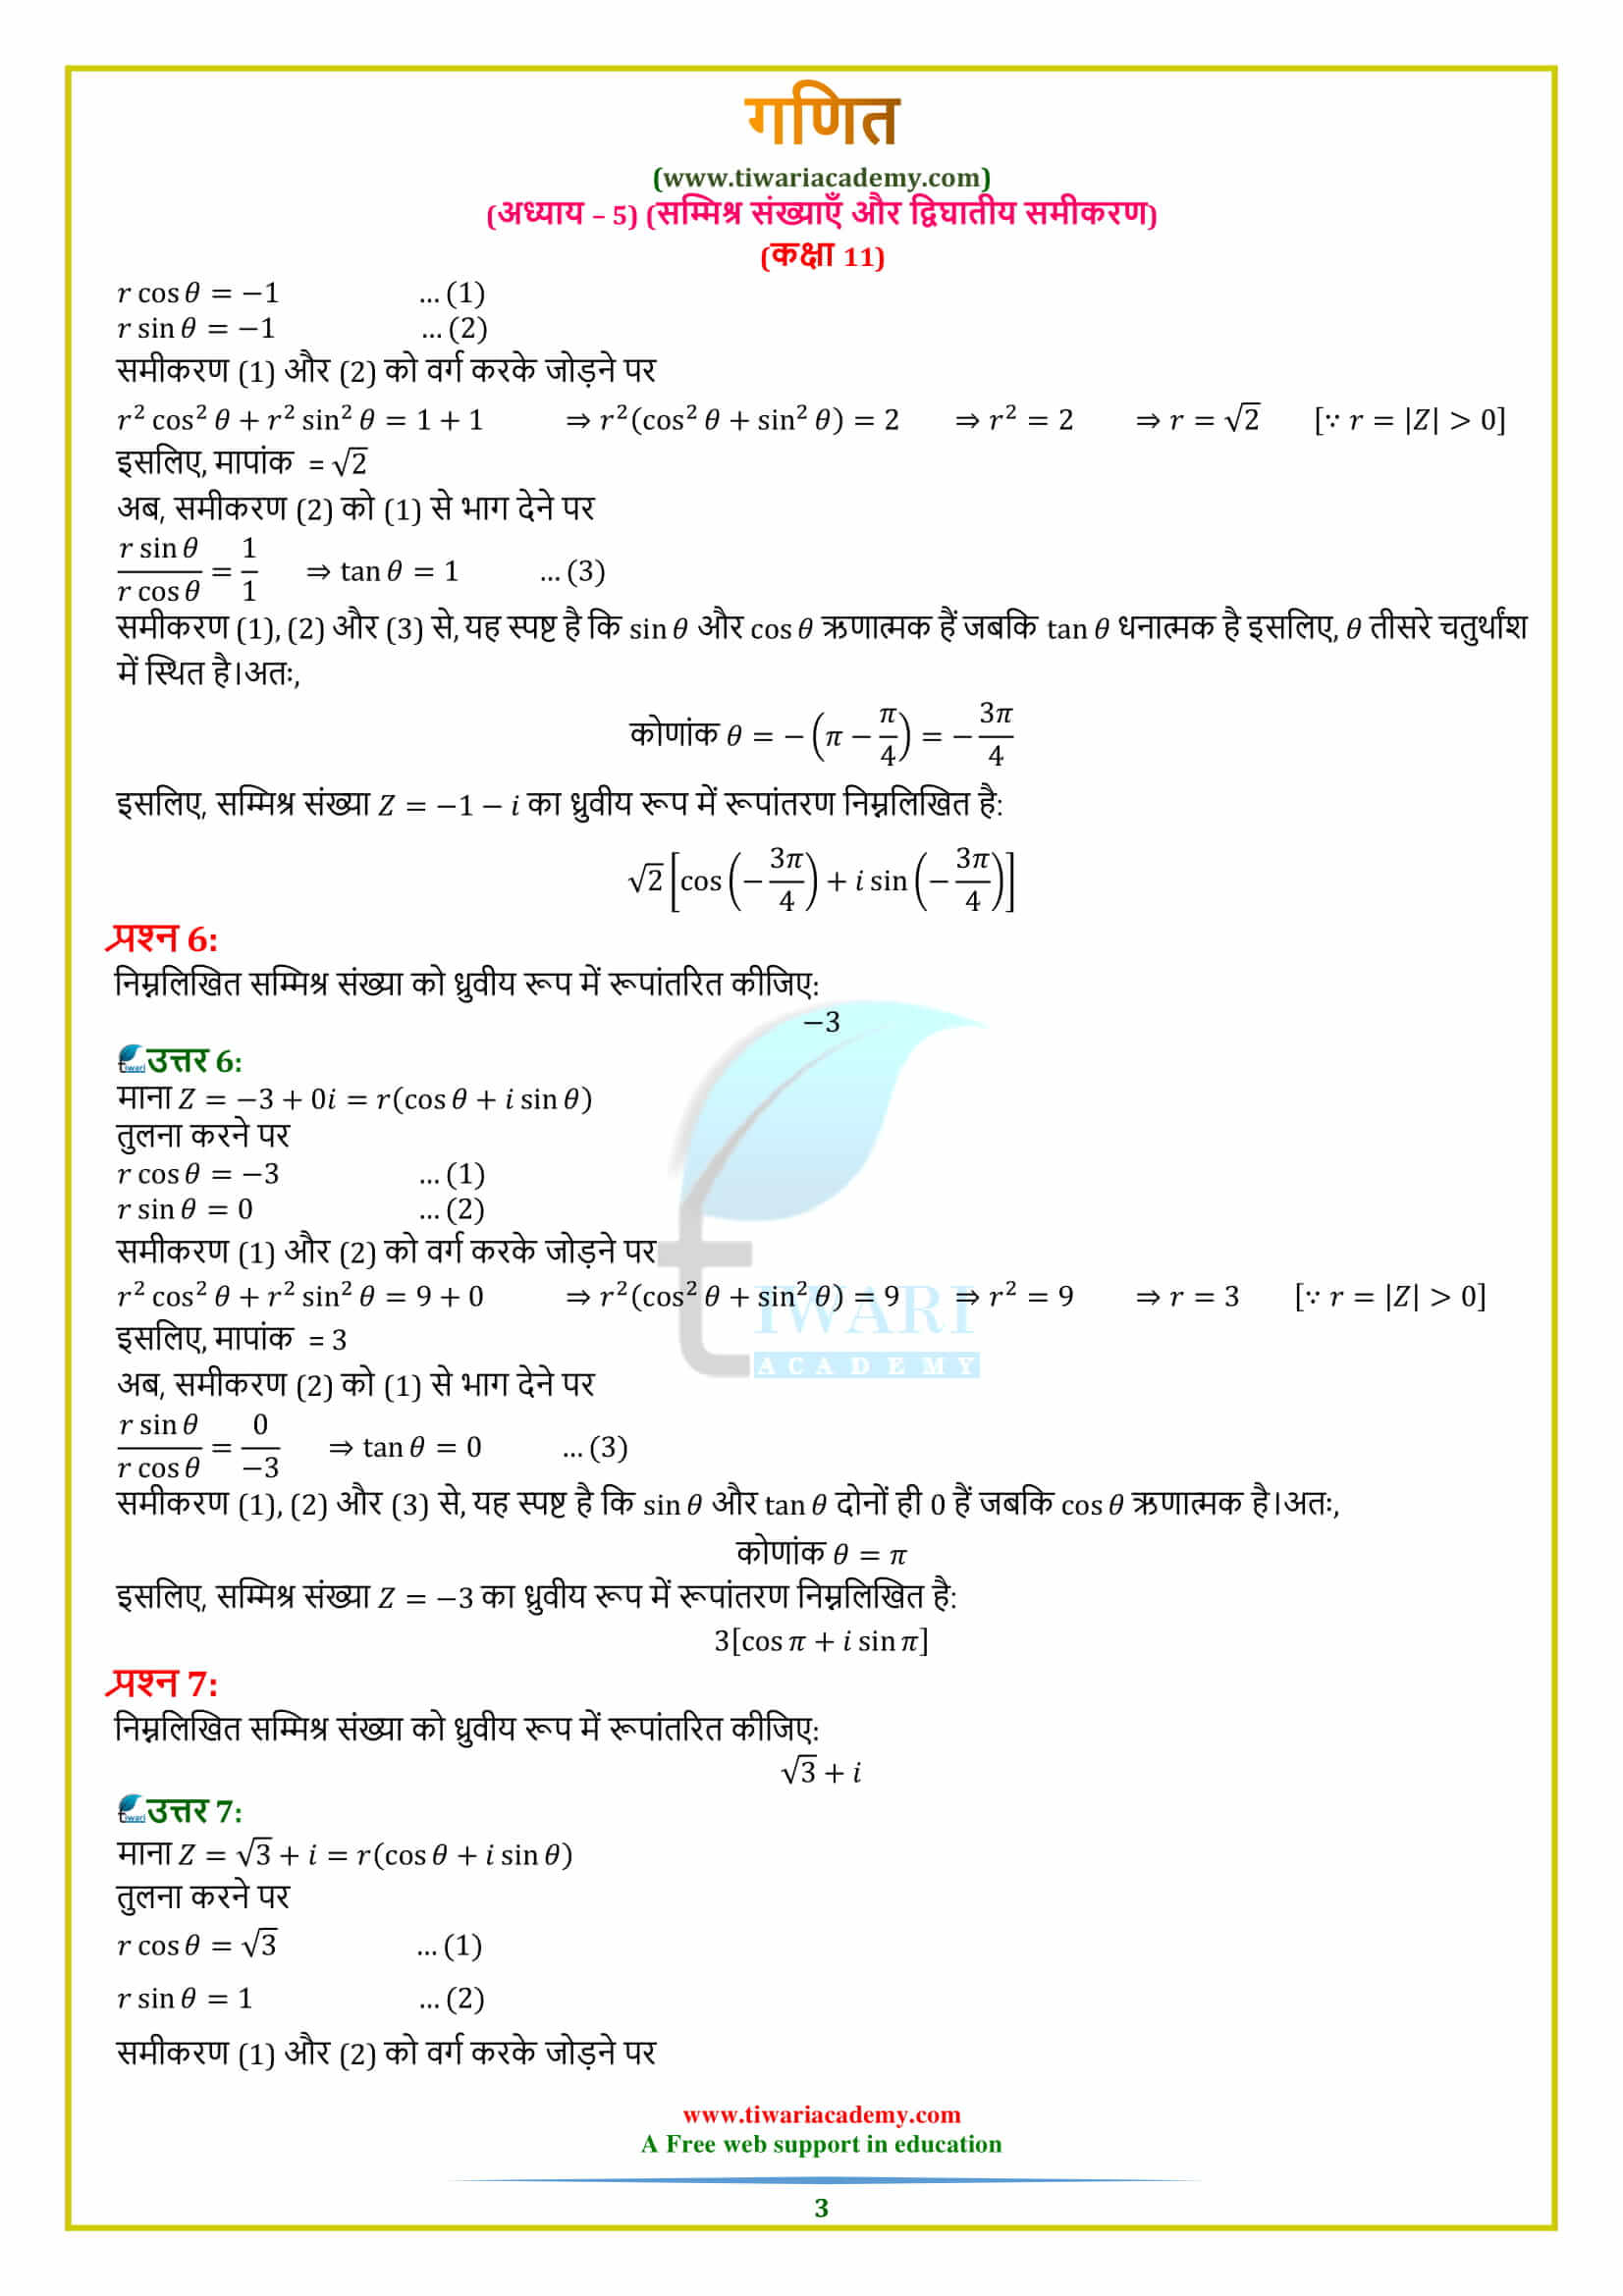 11 Maths Chapter 5 Exercise 5.2 solutions in Hindi for intermediate first year